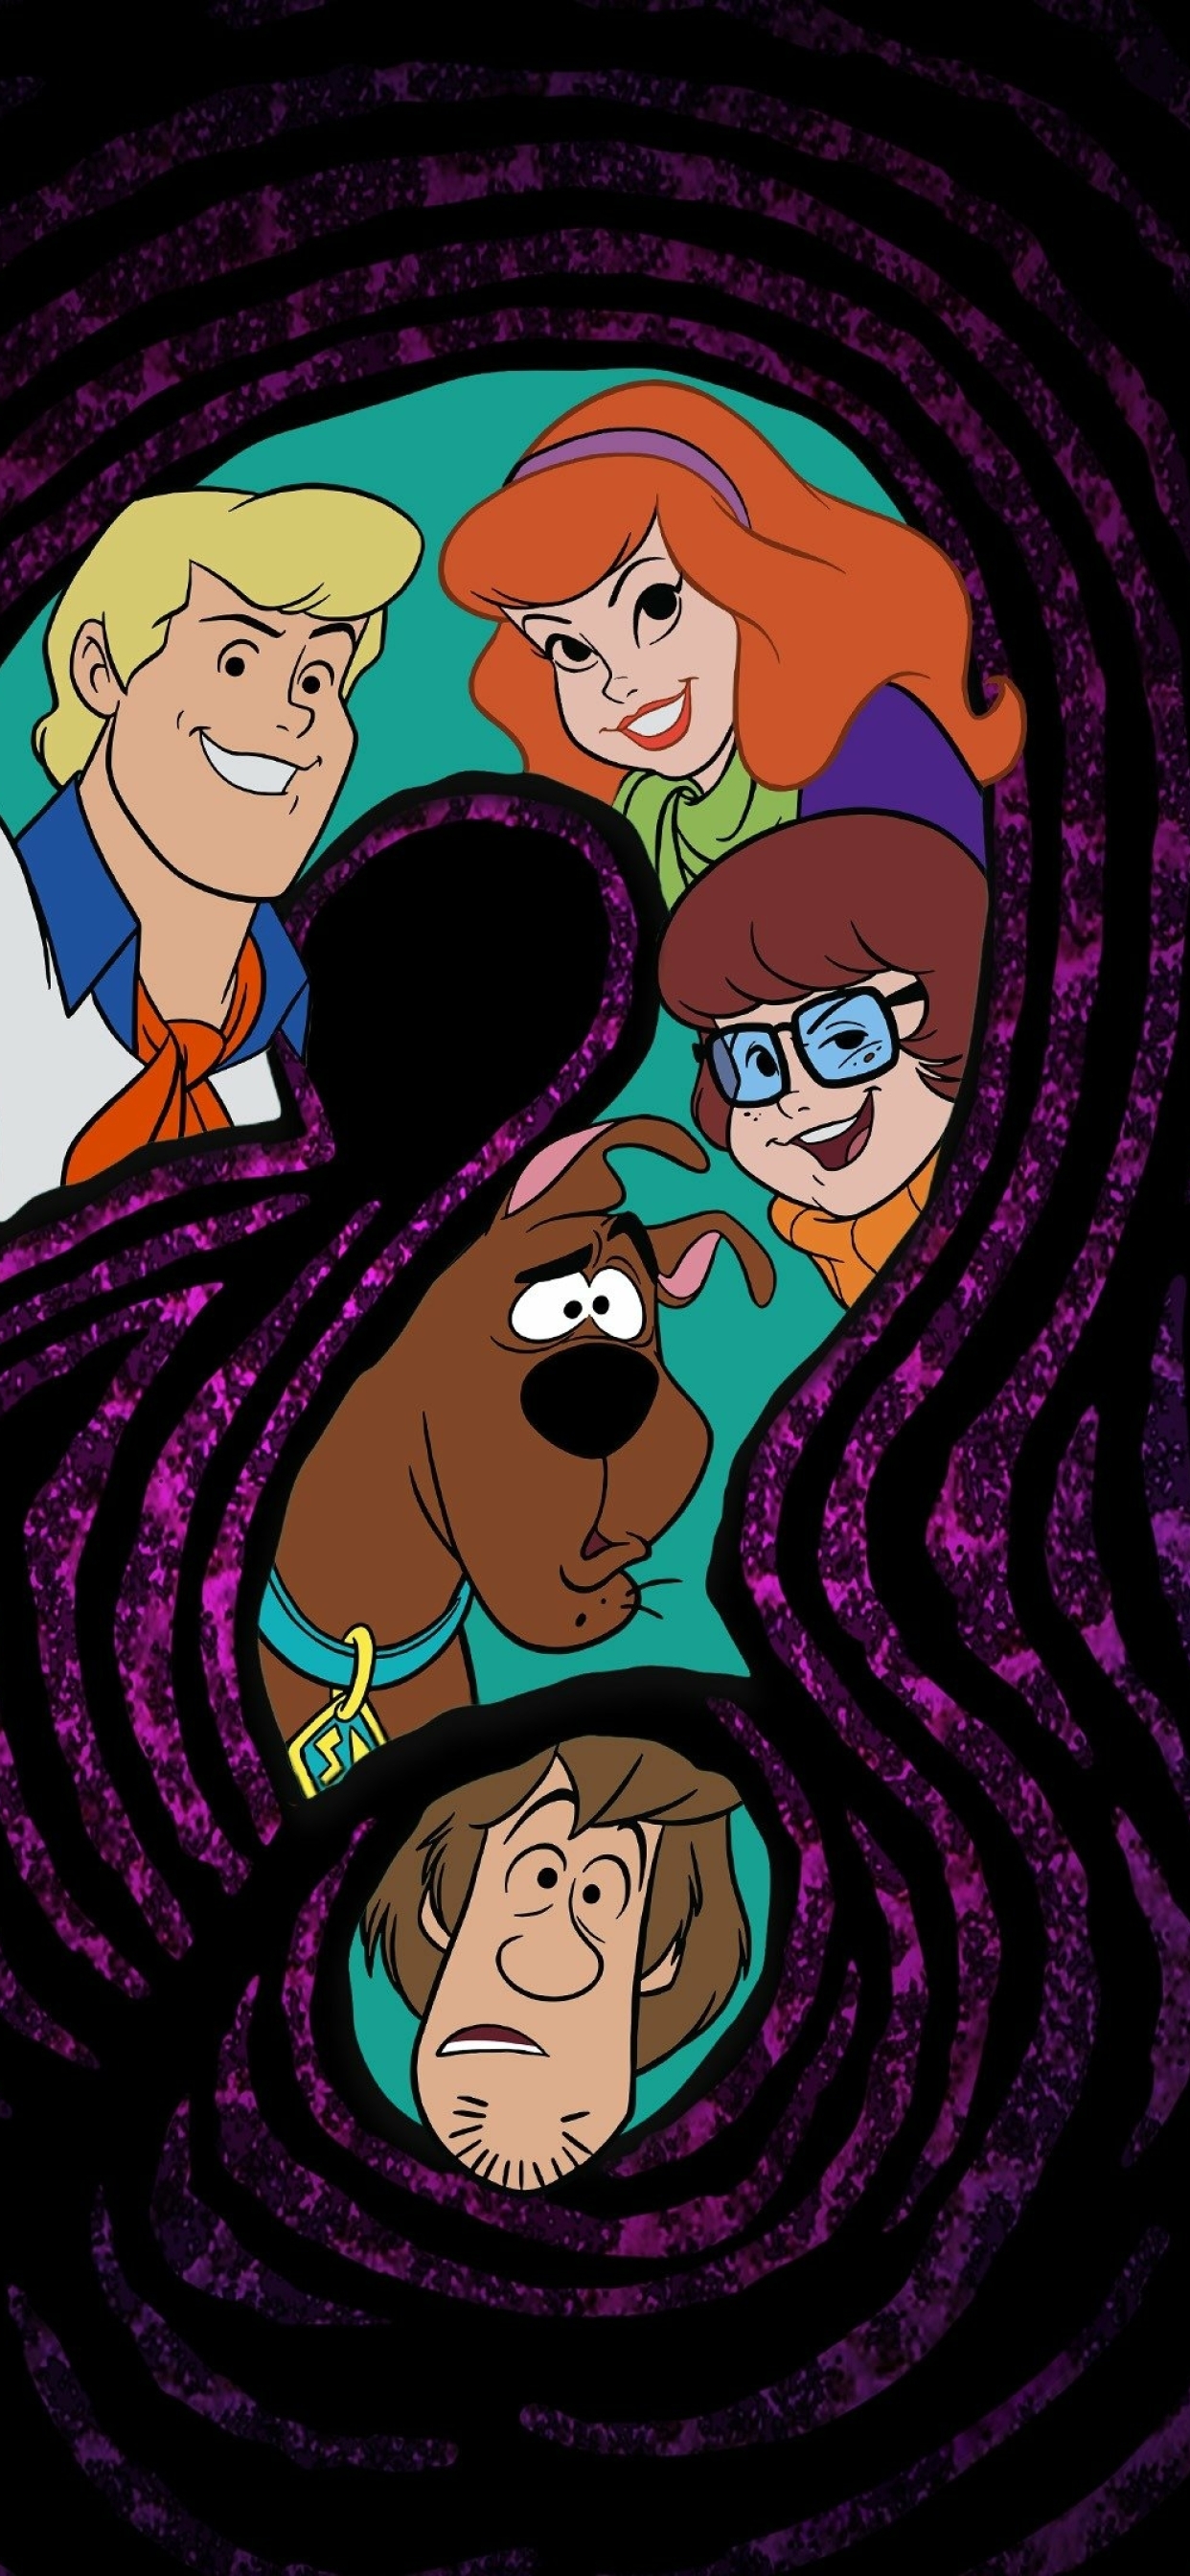 1 Scooby Doo Wallpapers, Hd Backgrounds, 4k Images, Pictures Page 1